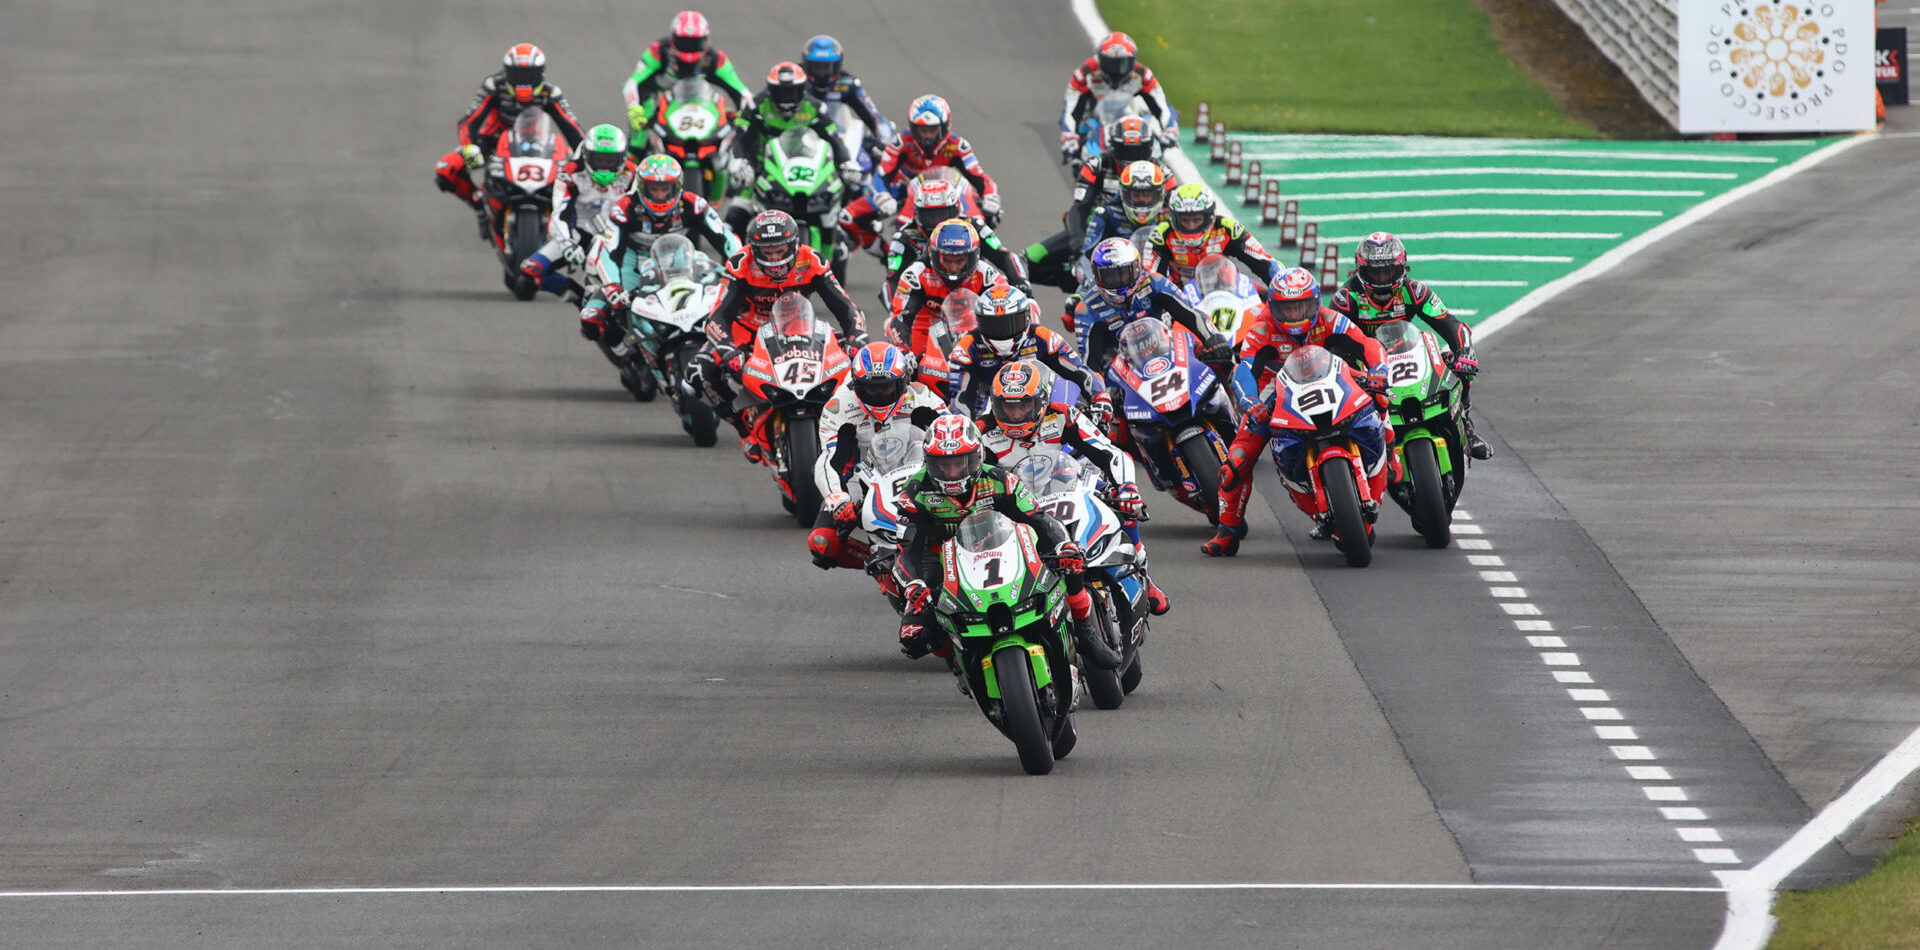 The start of a World Superbike race during Round Four at Donington Park. Photo courtesy Dorna.